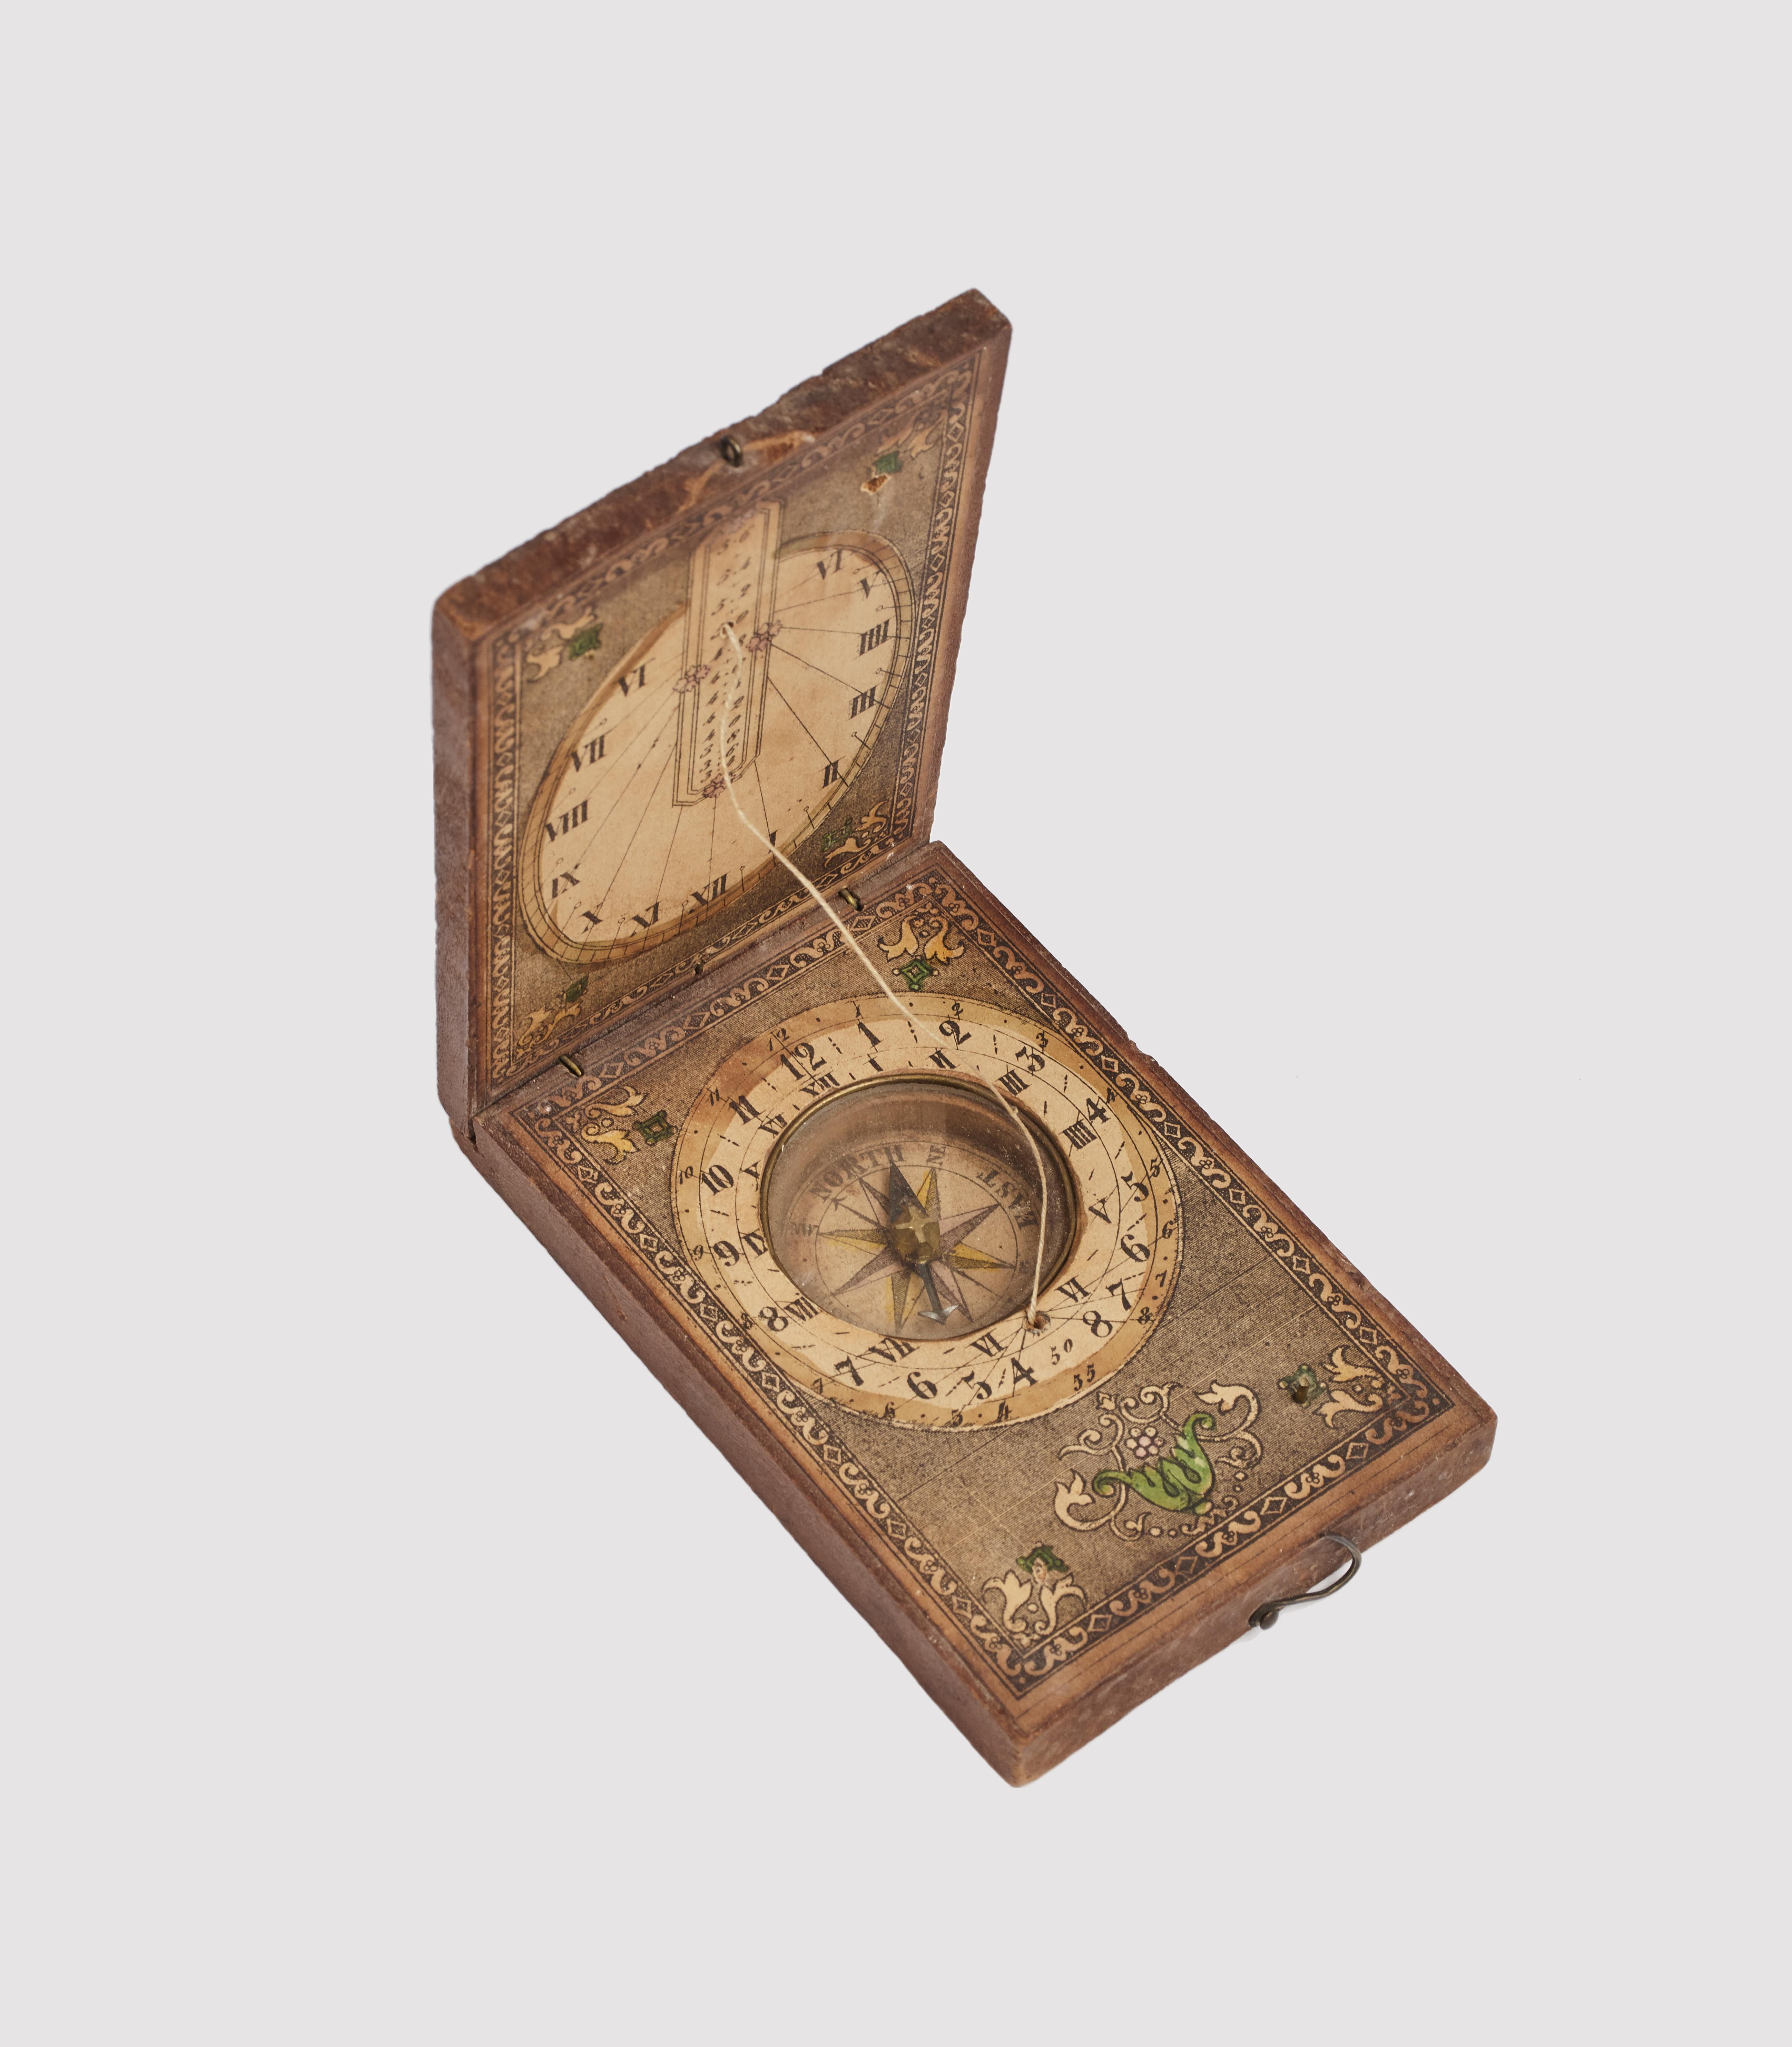 Pocket sundial, made out of wood, with print paper element on both the internal sides and to the top. England end of XVIII cent.